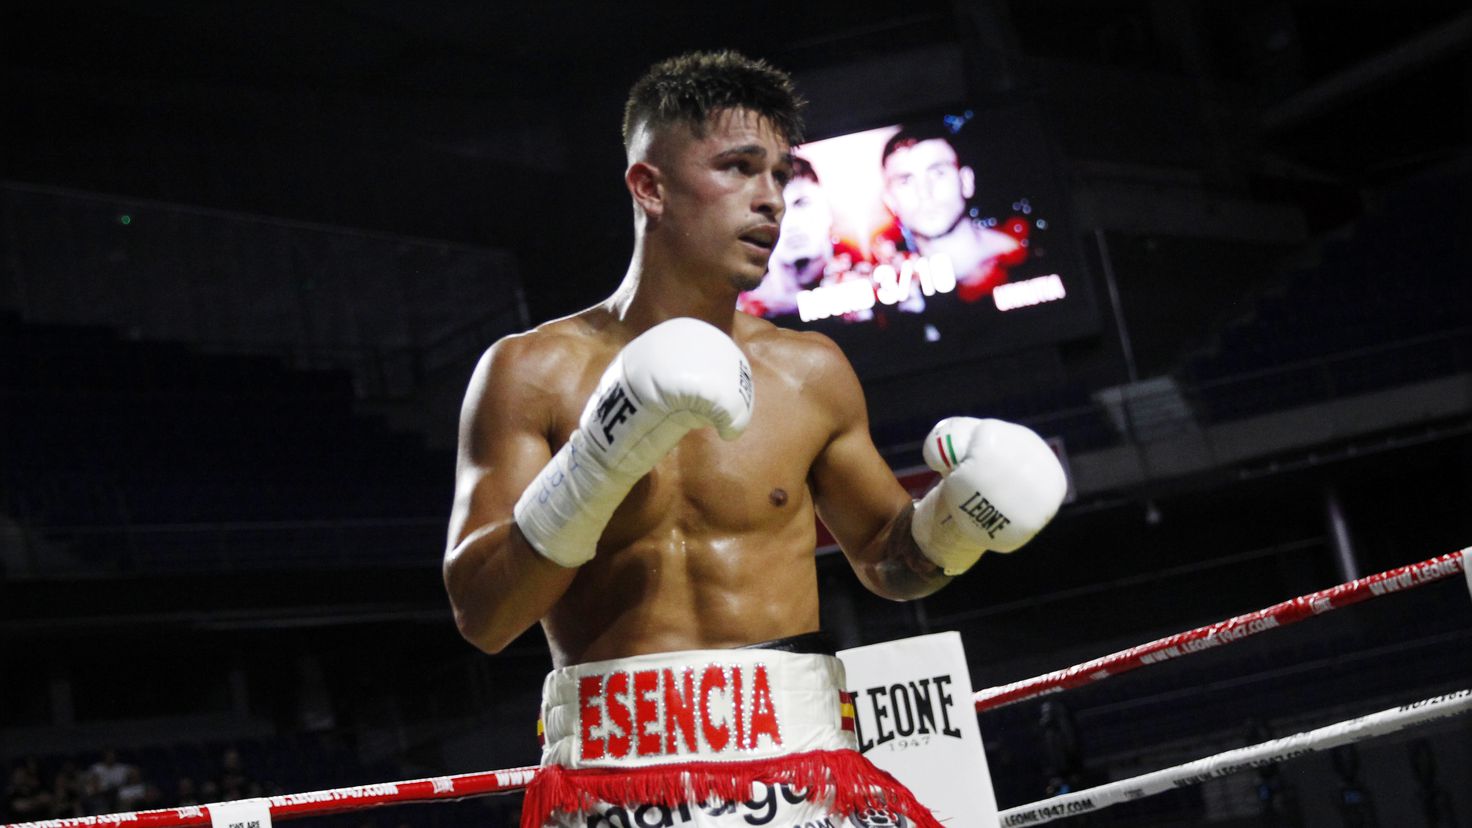 Samuel Molina already has a date and rival for the European
